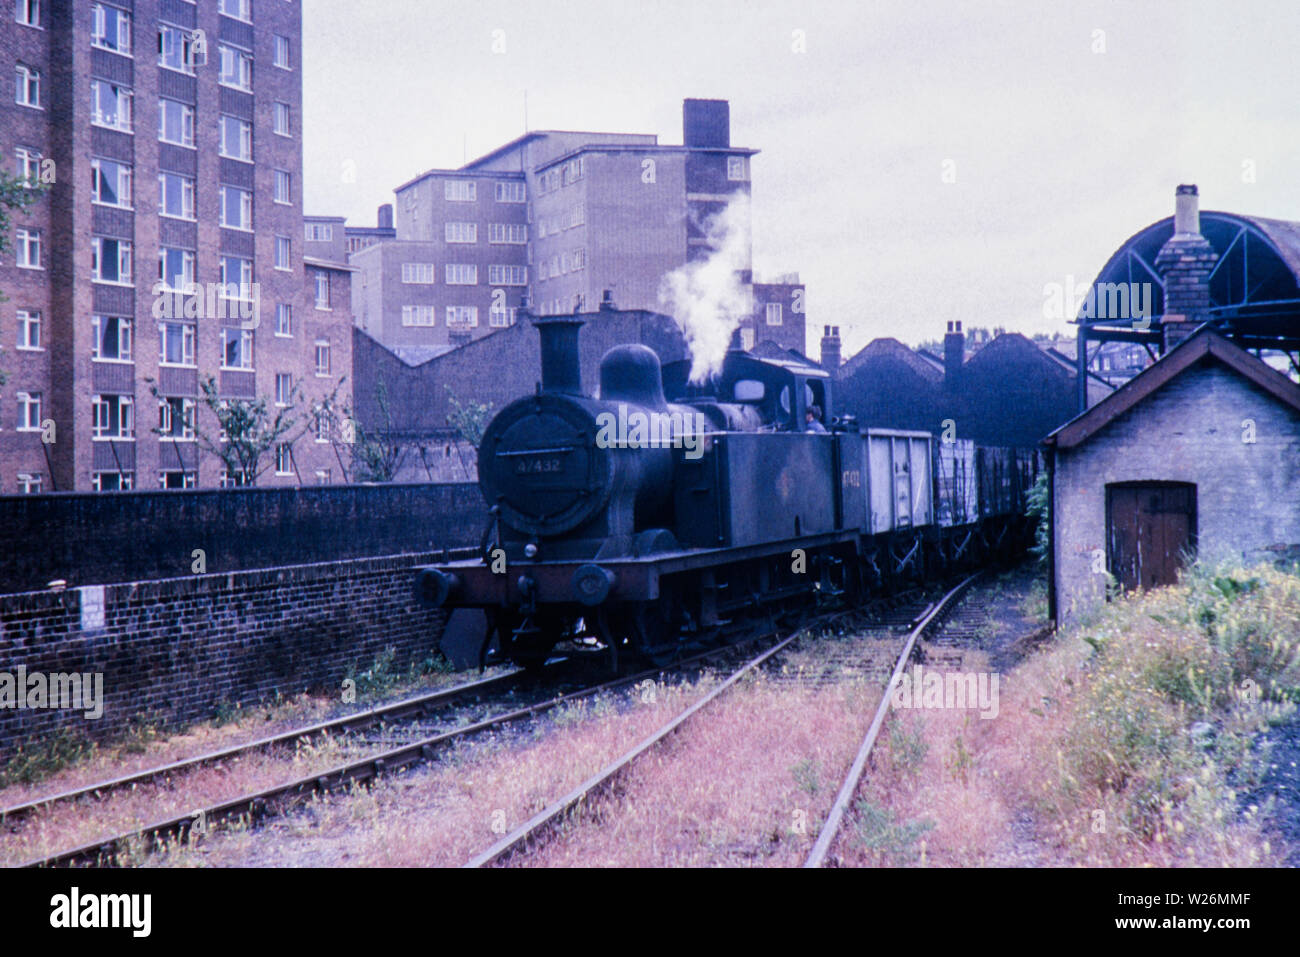 Steam Locomotive No 47432 (designation 0-6-0T) was introduced in 1924. Fowler post-Grouping development of Midland design with detail alterations. Some used as Departmental locos by British Rail. The train was disposed on 31/01/1966 This image was taken at Kensington High Street Station, London on 28th June 1962 Stock Photo